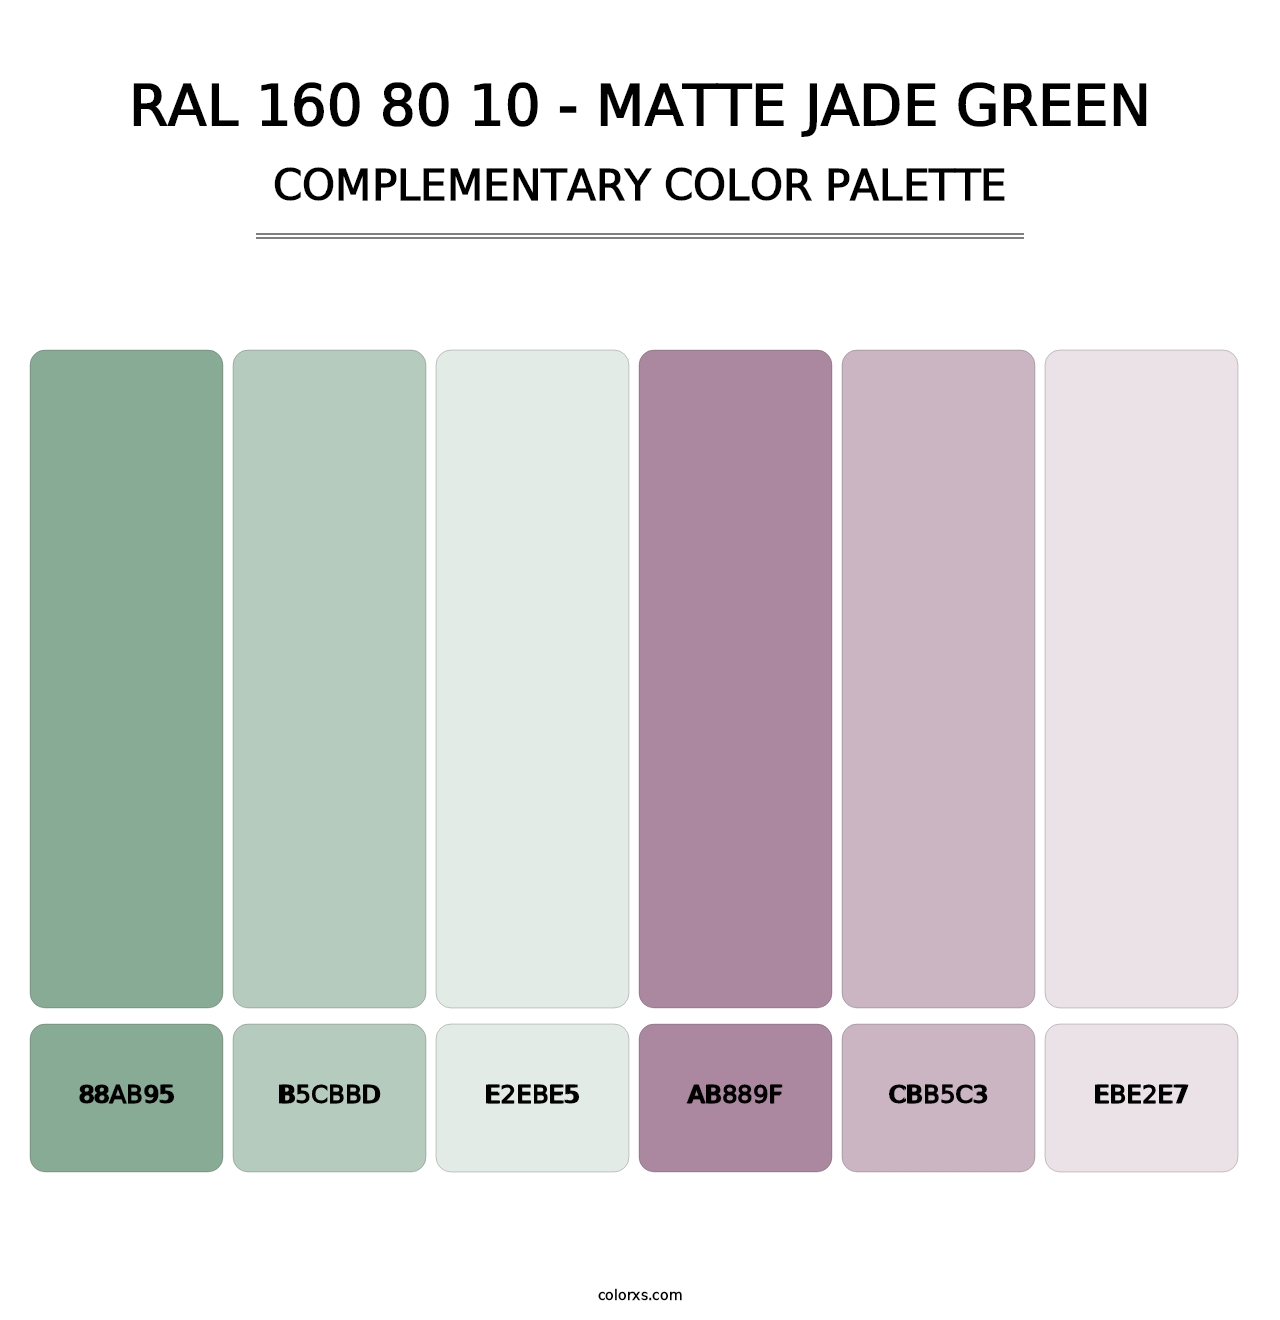 RAL 160 80 10 - Matte Jade Green - Complementary Color Palette